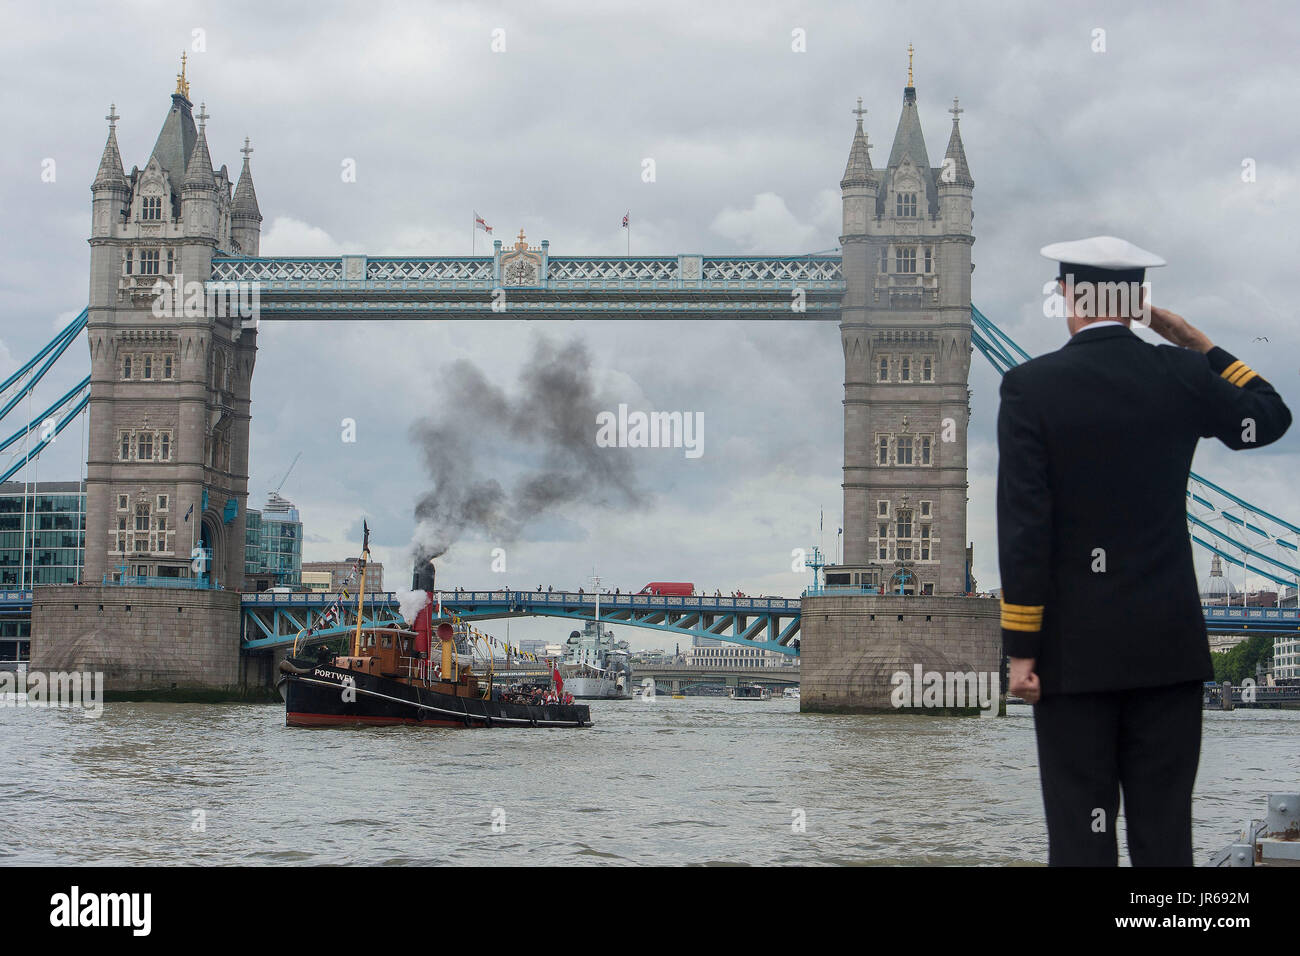 The ST Portwey, a 90-year-old steam tug, which was built on the Clyde in 1927, and which came under command of the Royal Navy during the Second World War, is saluted by Commander Richard Pethybridge as she steams past HMS President, the Royal Navy's permanent shore establishment on the River Thames in London, as they mark the tugs 90th birthday. Stock Photo